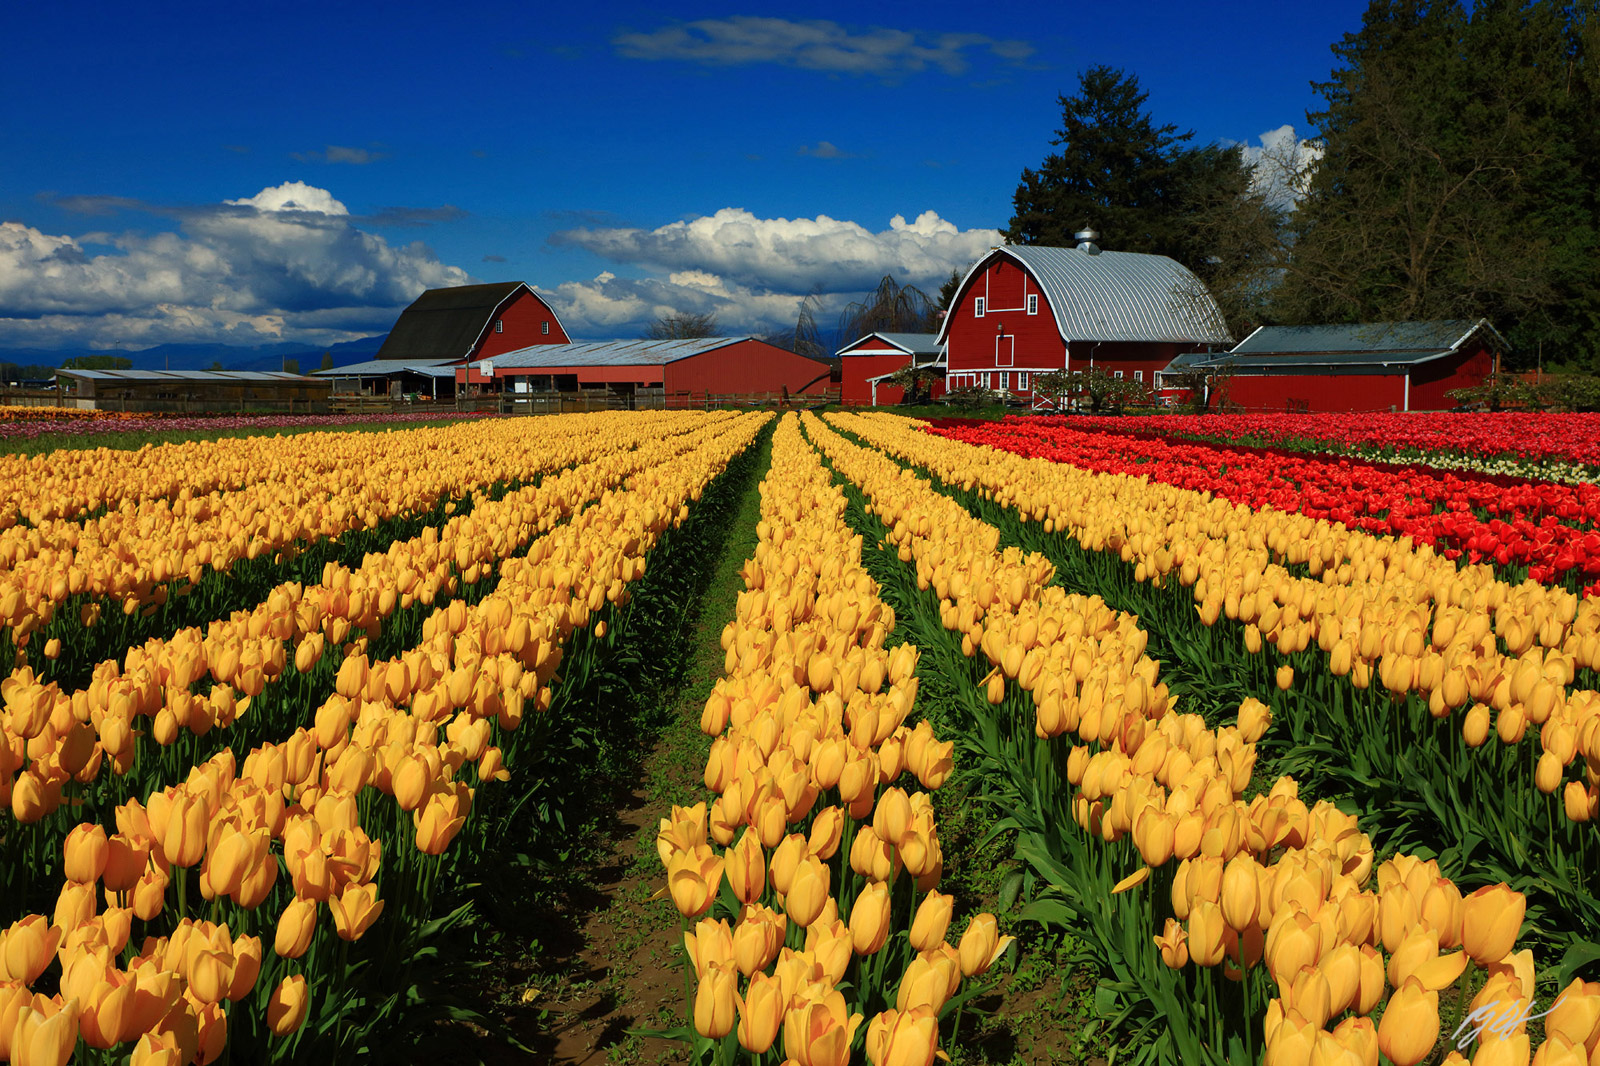 Tulips and Red Barn from Tulip Town in Skagit Valley Washington